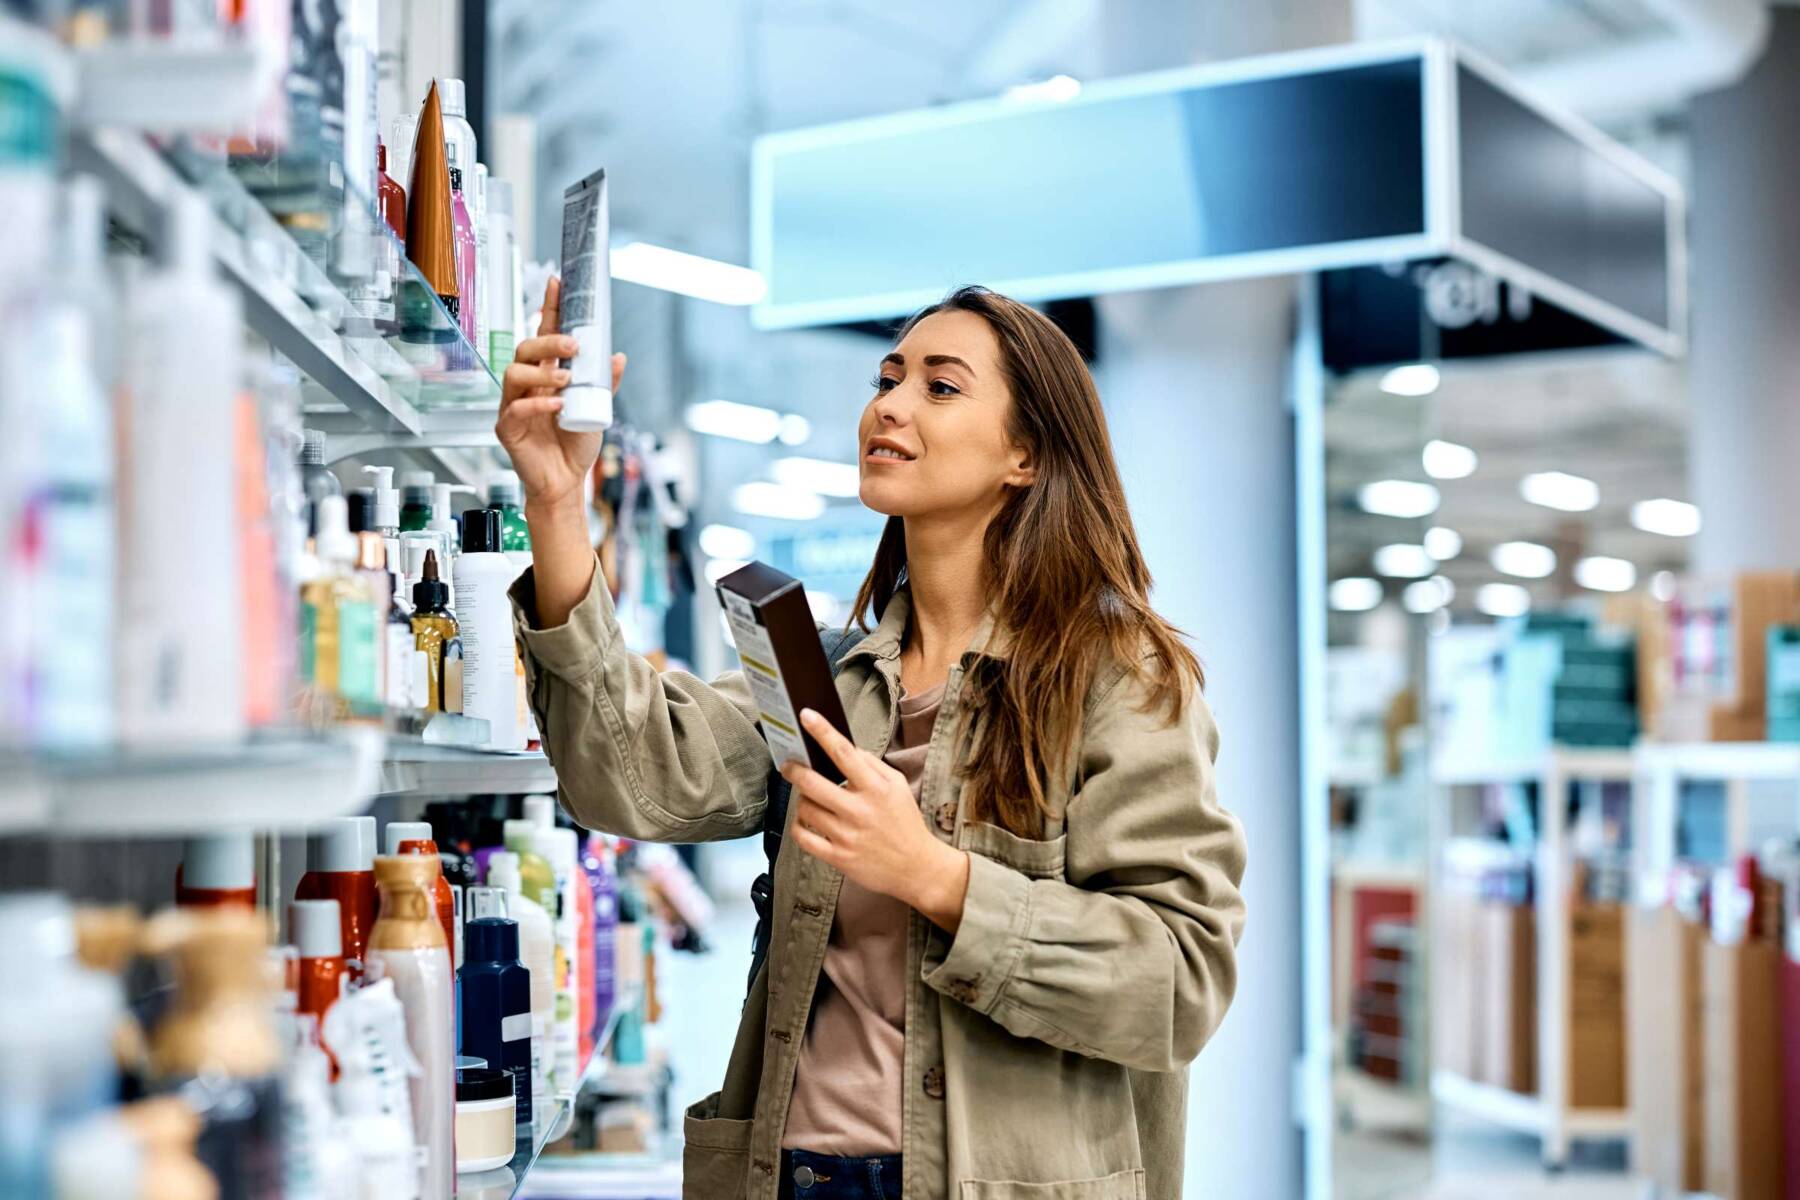 The Savvy Shopper's Guide to Choosing "Perfectly Imperfect" Skincare Products